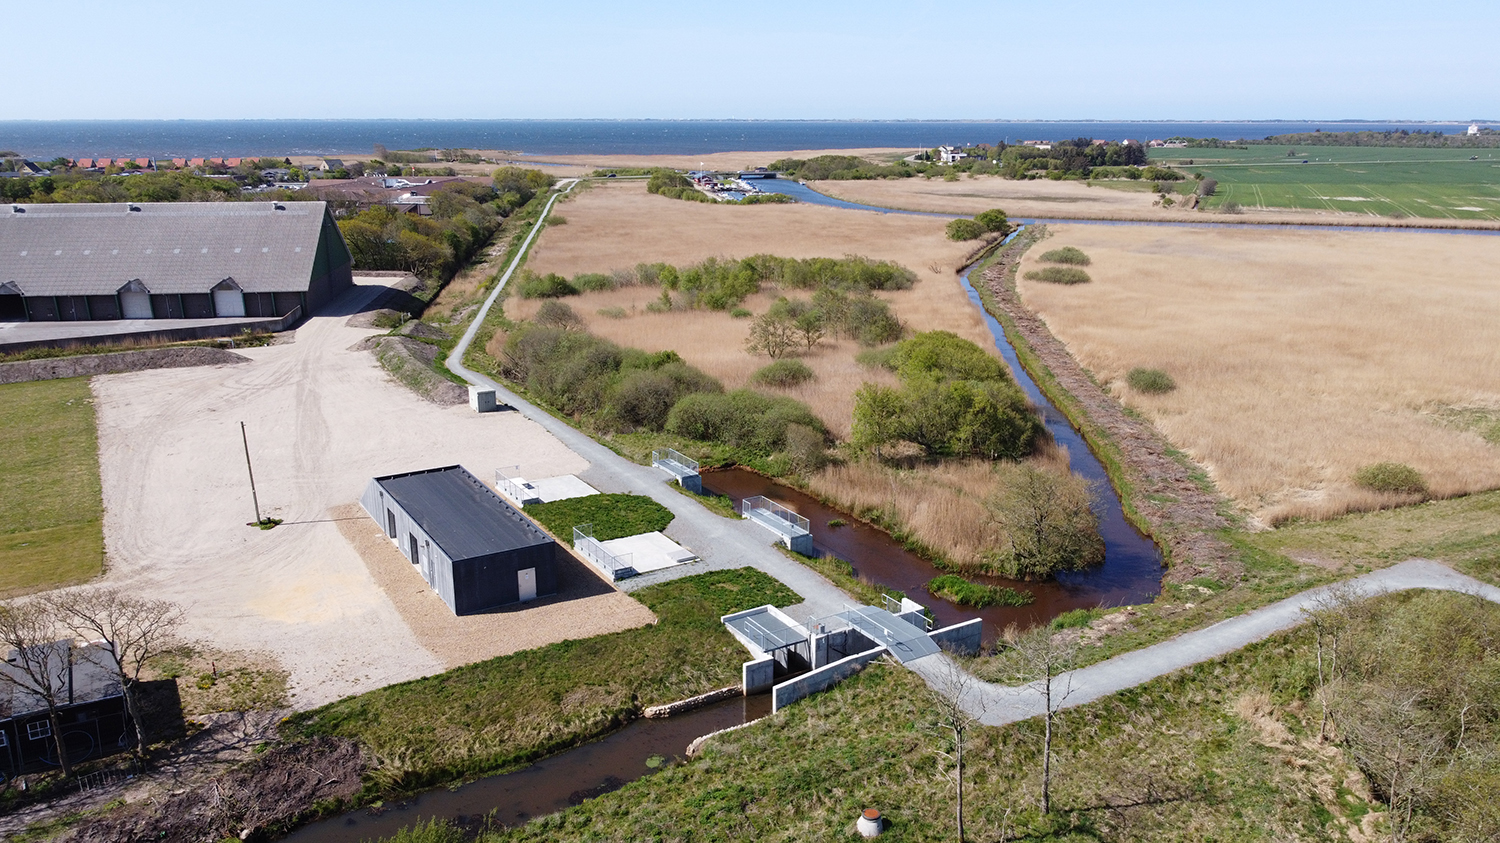 Defenses in the Ringkøbing Fjord have been bolstered by the installation of two new pumping stations, which have been designed and equipped by Sulzer. The new facilities will help to protect the town and the surrounding countryside for the next 40 years.